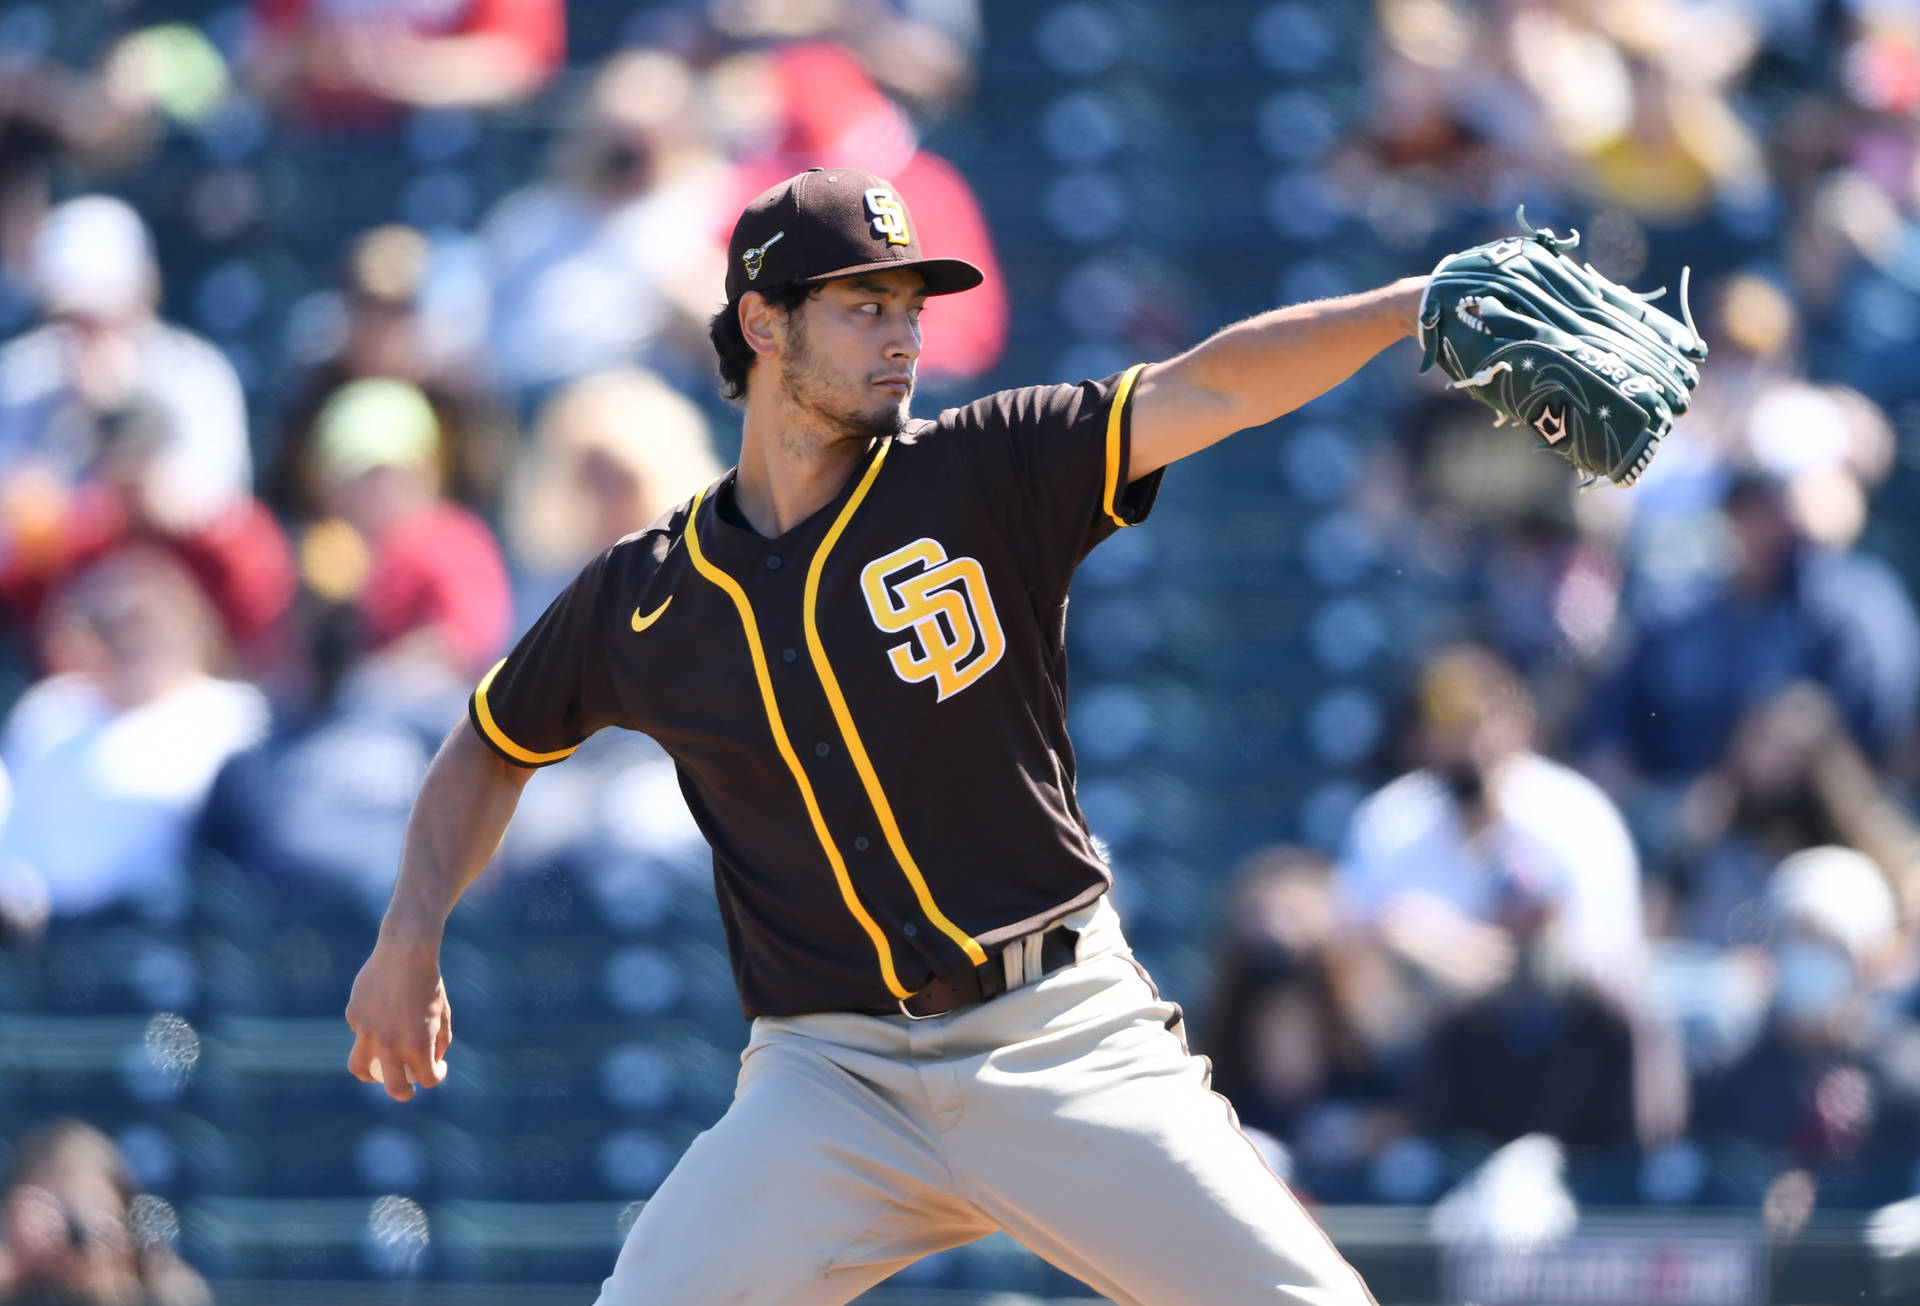 Download Yu Darvish In Black And Gold Wallpaper